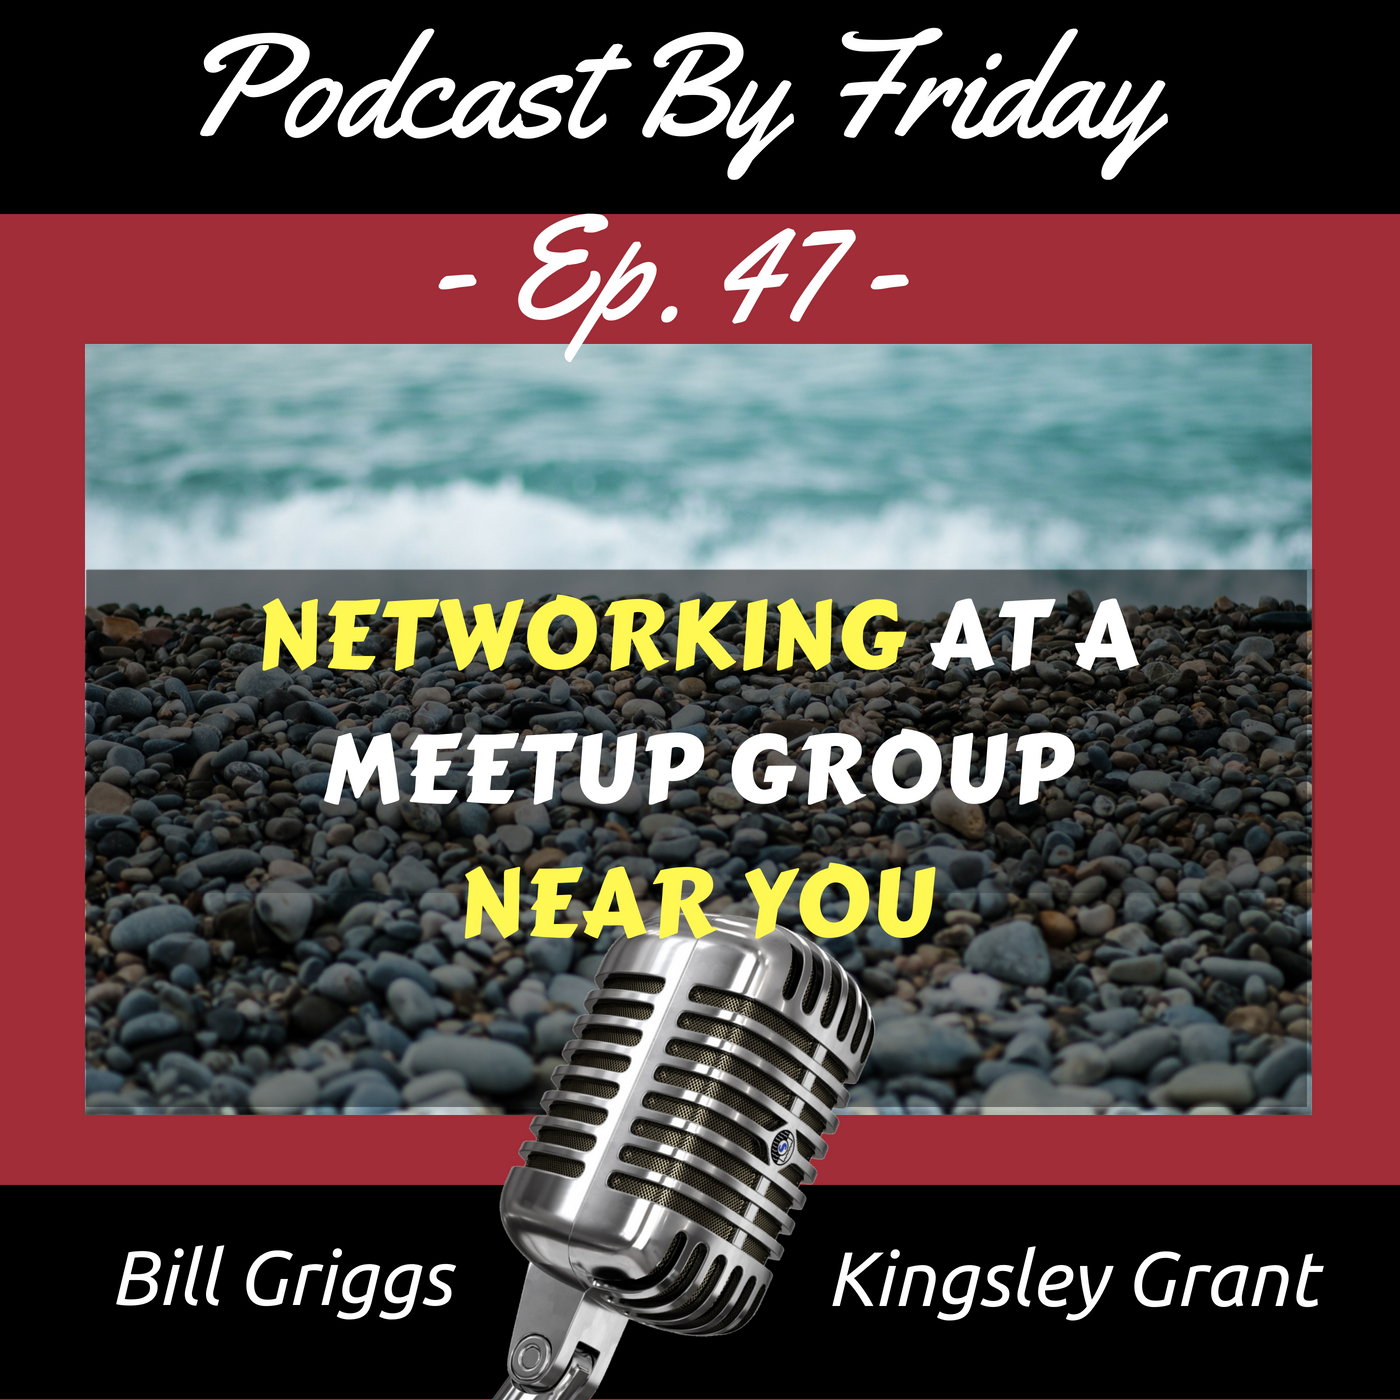 Networking at Meetup Groups Near You and Away by Bill Griggs and Kingsley Grant